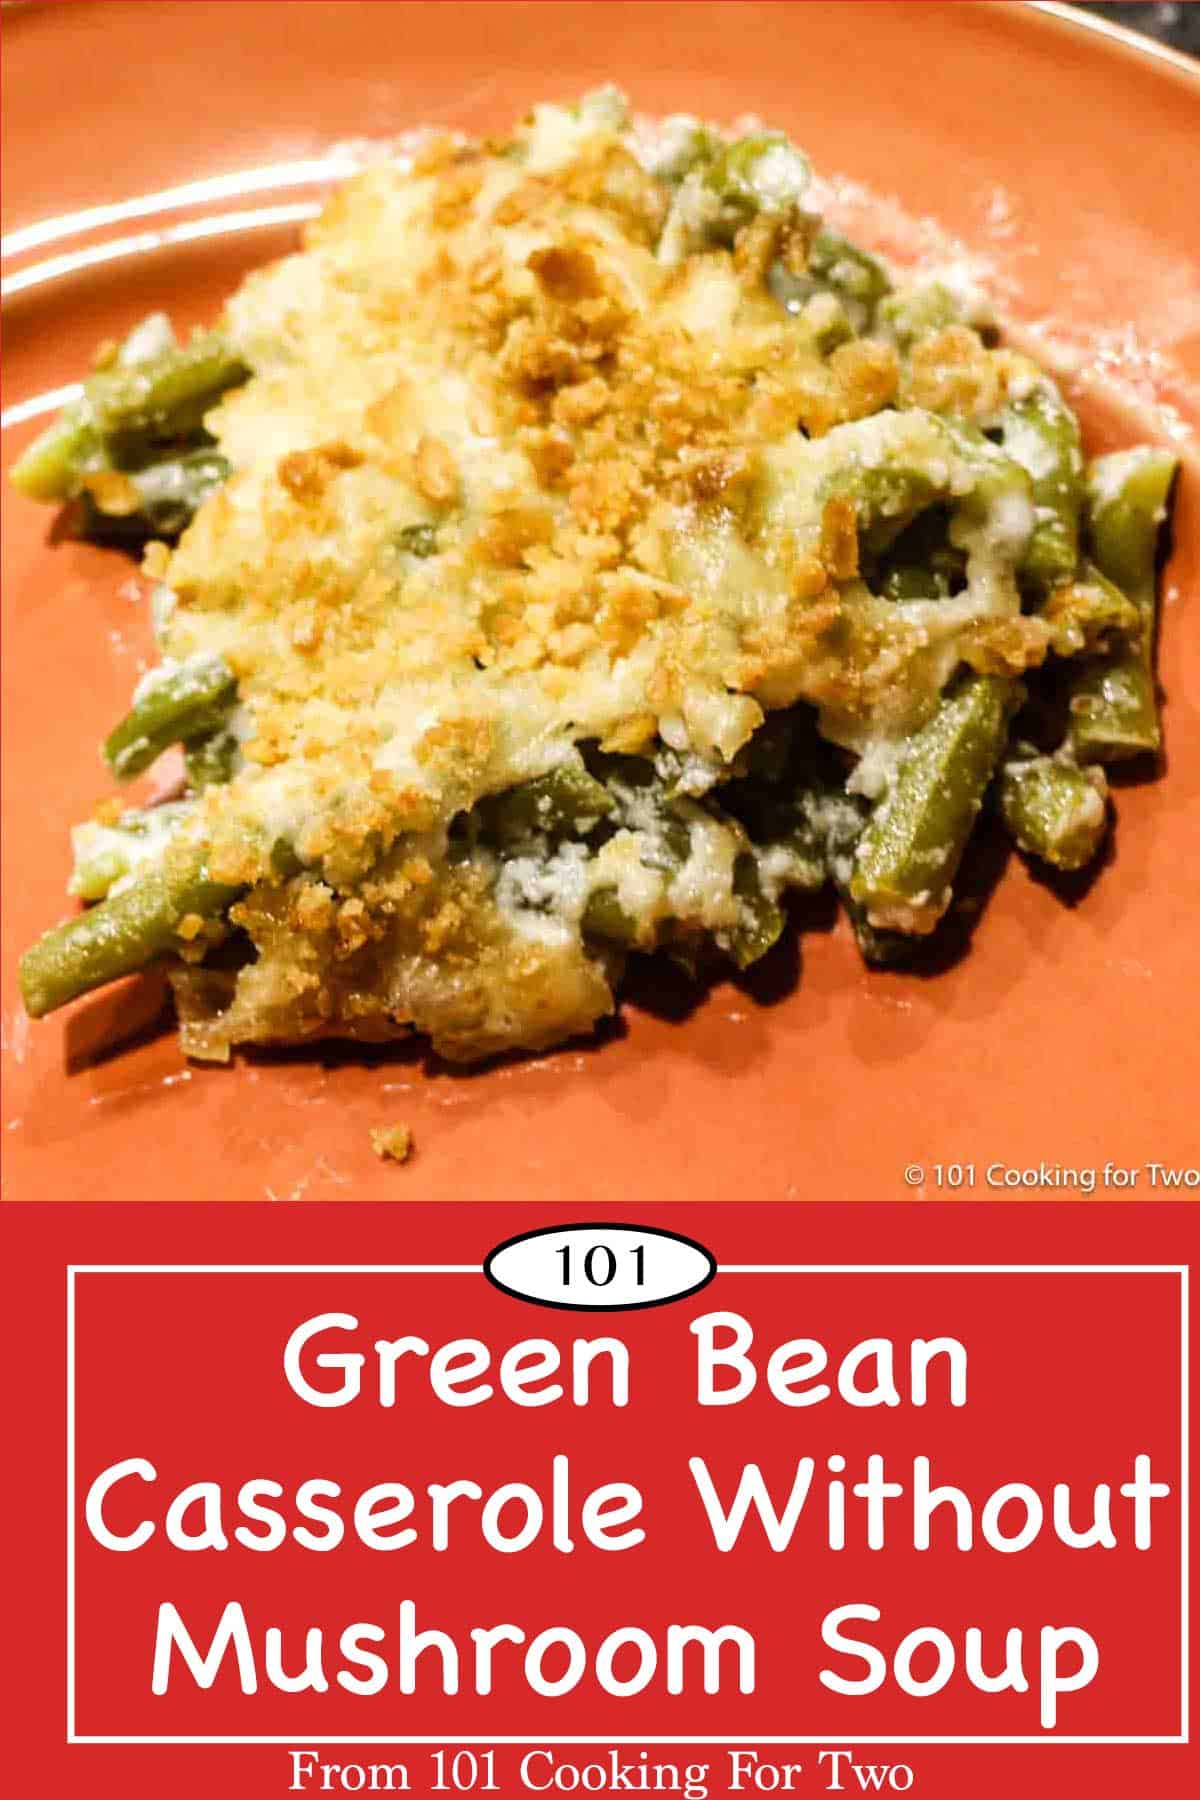 Green Bean Casserole Without Mushroom Soup - 101 Cooking For Two